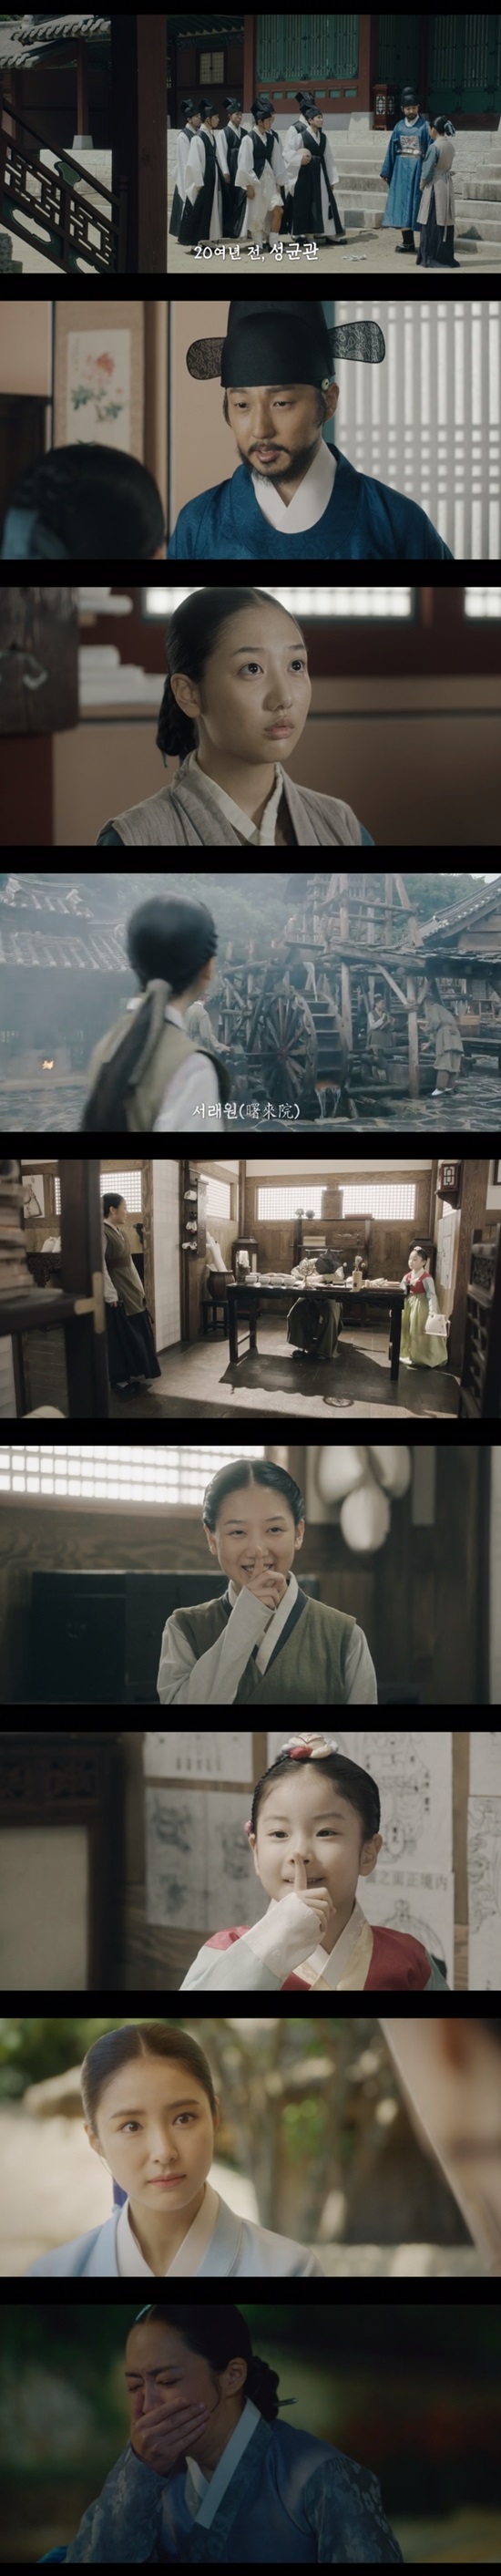 Shin Se-kyungs birth secret was revealed, and Jeon Ye-seo, who learned about it, was in a hurry.In the MBC drama Rookie Historian Goo Hae-ryung (played by Kim Ho-soo/directed by Kang Il-soo Han Hyun-hee), which was broadcast on August 29, the mother-sister (Jeon Ye-seo) was aware of the identity of Rookie Historian Goo Hae-ryung (Shin Se-kyung) ...When Koo Jae-kyung (Fairy Hwan), who learned medicine together in Seoraewon in the past, introduced Rookie Historian Goo Hae-ryung as my sister, Mohwa questioned, When did you have a sister? Soon, Rookie Historian Goo Hae-ryung was surprised to learn that he was the daughter of Lean on Me.Koo asked the mother-of-pearl to keep secrets, saying, Please pretend not to know, there is something to do.The mother-of-one left the room and said to Rookie Historian Goo Hae-ryung, Im sorry, Ill see you next time.Rookie Historian Goo Hae-ryung wondered and told Koo Jae-kyung, What did you talk about in there?I asked him if he knew, but he closed his mouth saying, Lets rest.My father is a man who helped me at the top, not medicine, and has no name or office.He died early. The mother-of-one said to herself, No ... and soon recalled the past twenty years ago.Twenty years ago, Mohwa had a conflict after pouring Brine on the injured leg of Sungkyunkwans larvae, and Youngan Seomunjik helped the mother.Sungkyunkwan larvae sprayed Brine with dirty hands. When the castle was angry, Youngan Seomunjik said, The hands of the government, your feet with the water, what would be more dirty? Go and wash.I smell sweat, he said, scolding the larvae and praising the mother for how did you know, saying, How to write a Brine on a wound.In addition, the preface to Youngan said to Mohwa, I believe that when heaven gives a person, it gives a lot of things because it is a high status and does not give a lot of things because it is a low status.You have a lot of things, no matter what you were born, so be a precious person by my side. He gave me a chance to learn medicine at Seoraewon.Thanks to this, Mohwa was able to learn Western medicine in Seoraewon.The mother-of-one was surprised that Lean on Mes daughter, who was like my benefactor, was Rookie Historian Goo Hae-ryung.Earlier, Mohwa delivered the book Woodujongseo written by Youngan Seomunjik to Rookie Historian Goo Hae-ryung, and Rookie Historian Goo Hae-ryung read the book and saved Lee Rim (Cha Eun-woo) by persuading the people.Rookie Historian Goo Hae-ryungs author of the book, Rookie Historian Goo Hae-ryungs father, revealed the fact that he was the father of Reversal story.Yoo Gyeong-sang